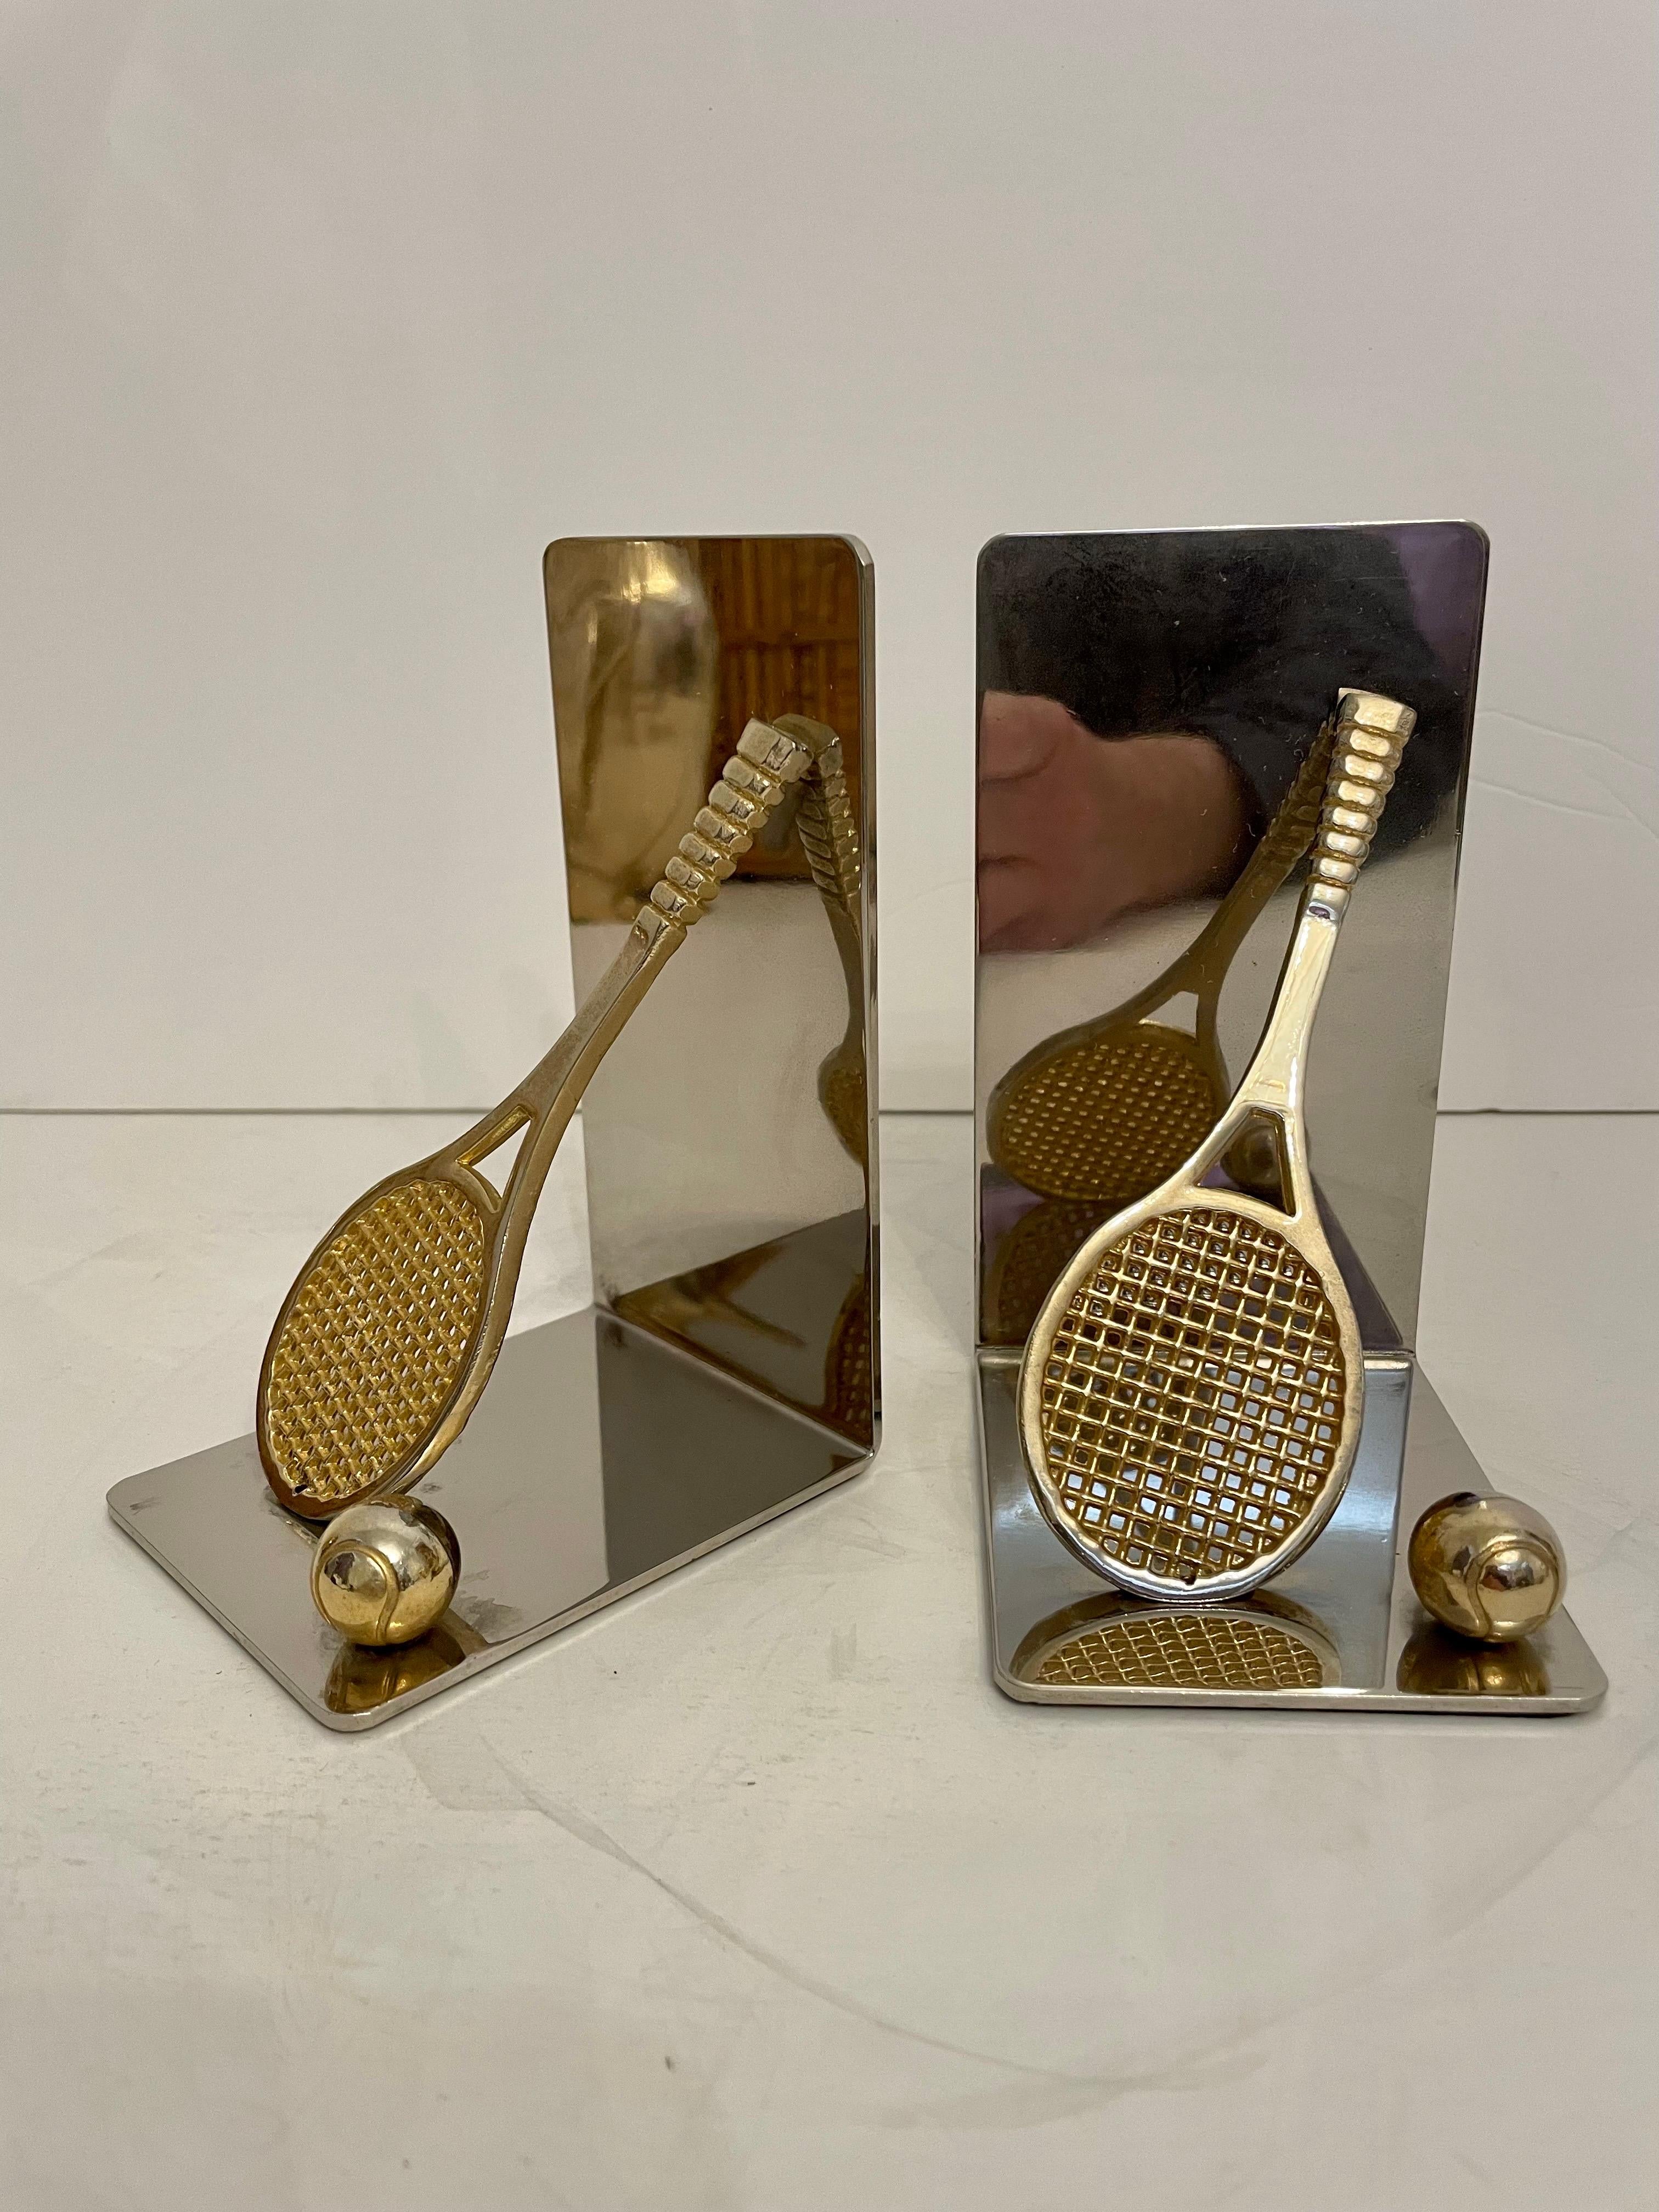 Nice set of brass and chrome tennis racket bookends. Features a brass tennis racket and ball on each. Has thin foam on bottom of each to prevent scratching furniture. 5.5